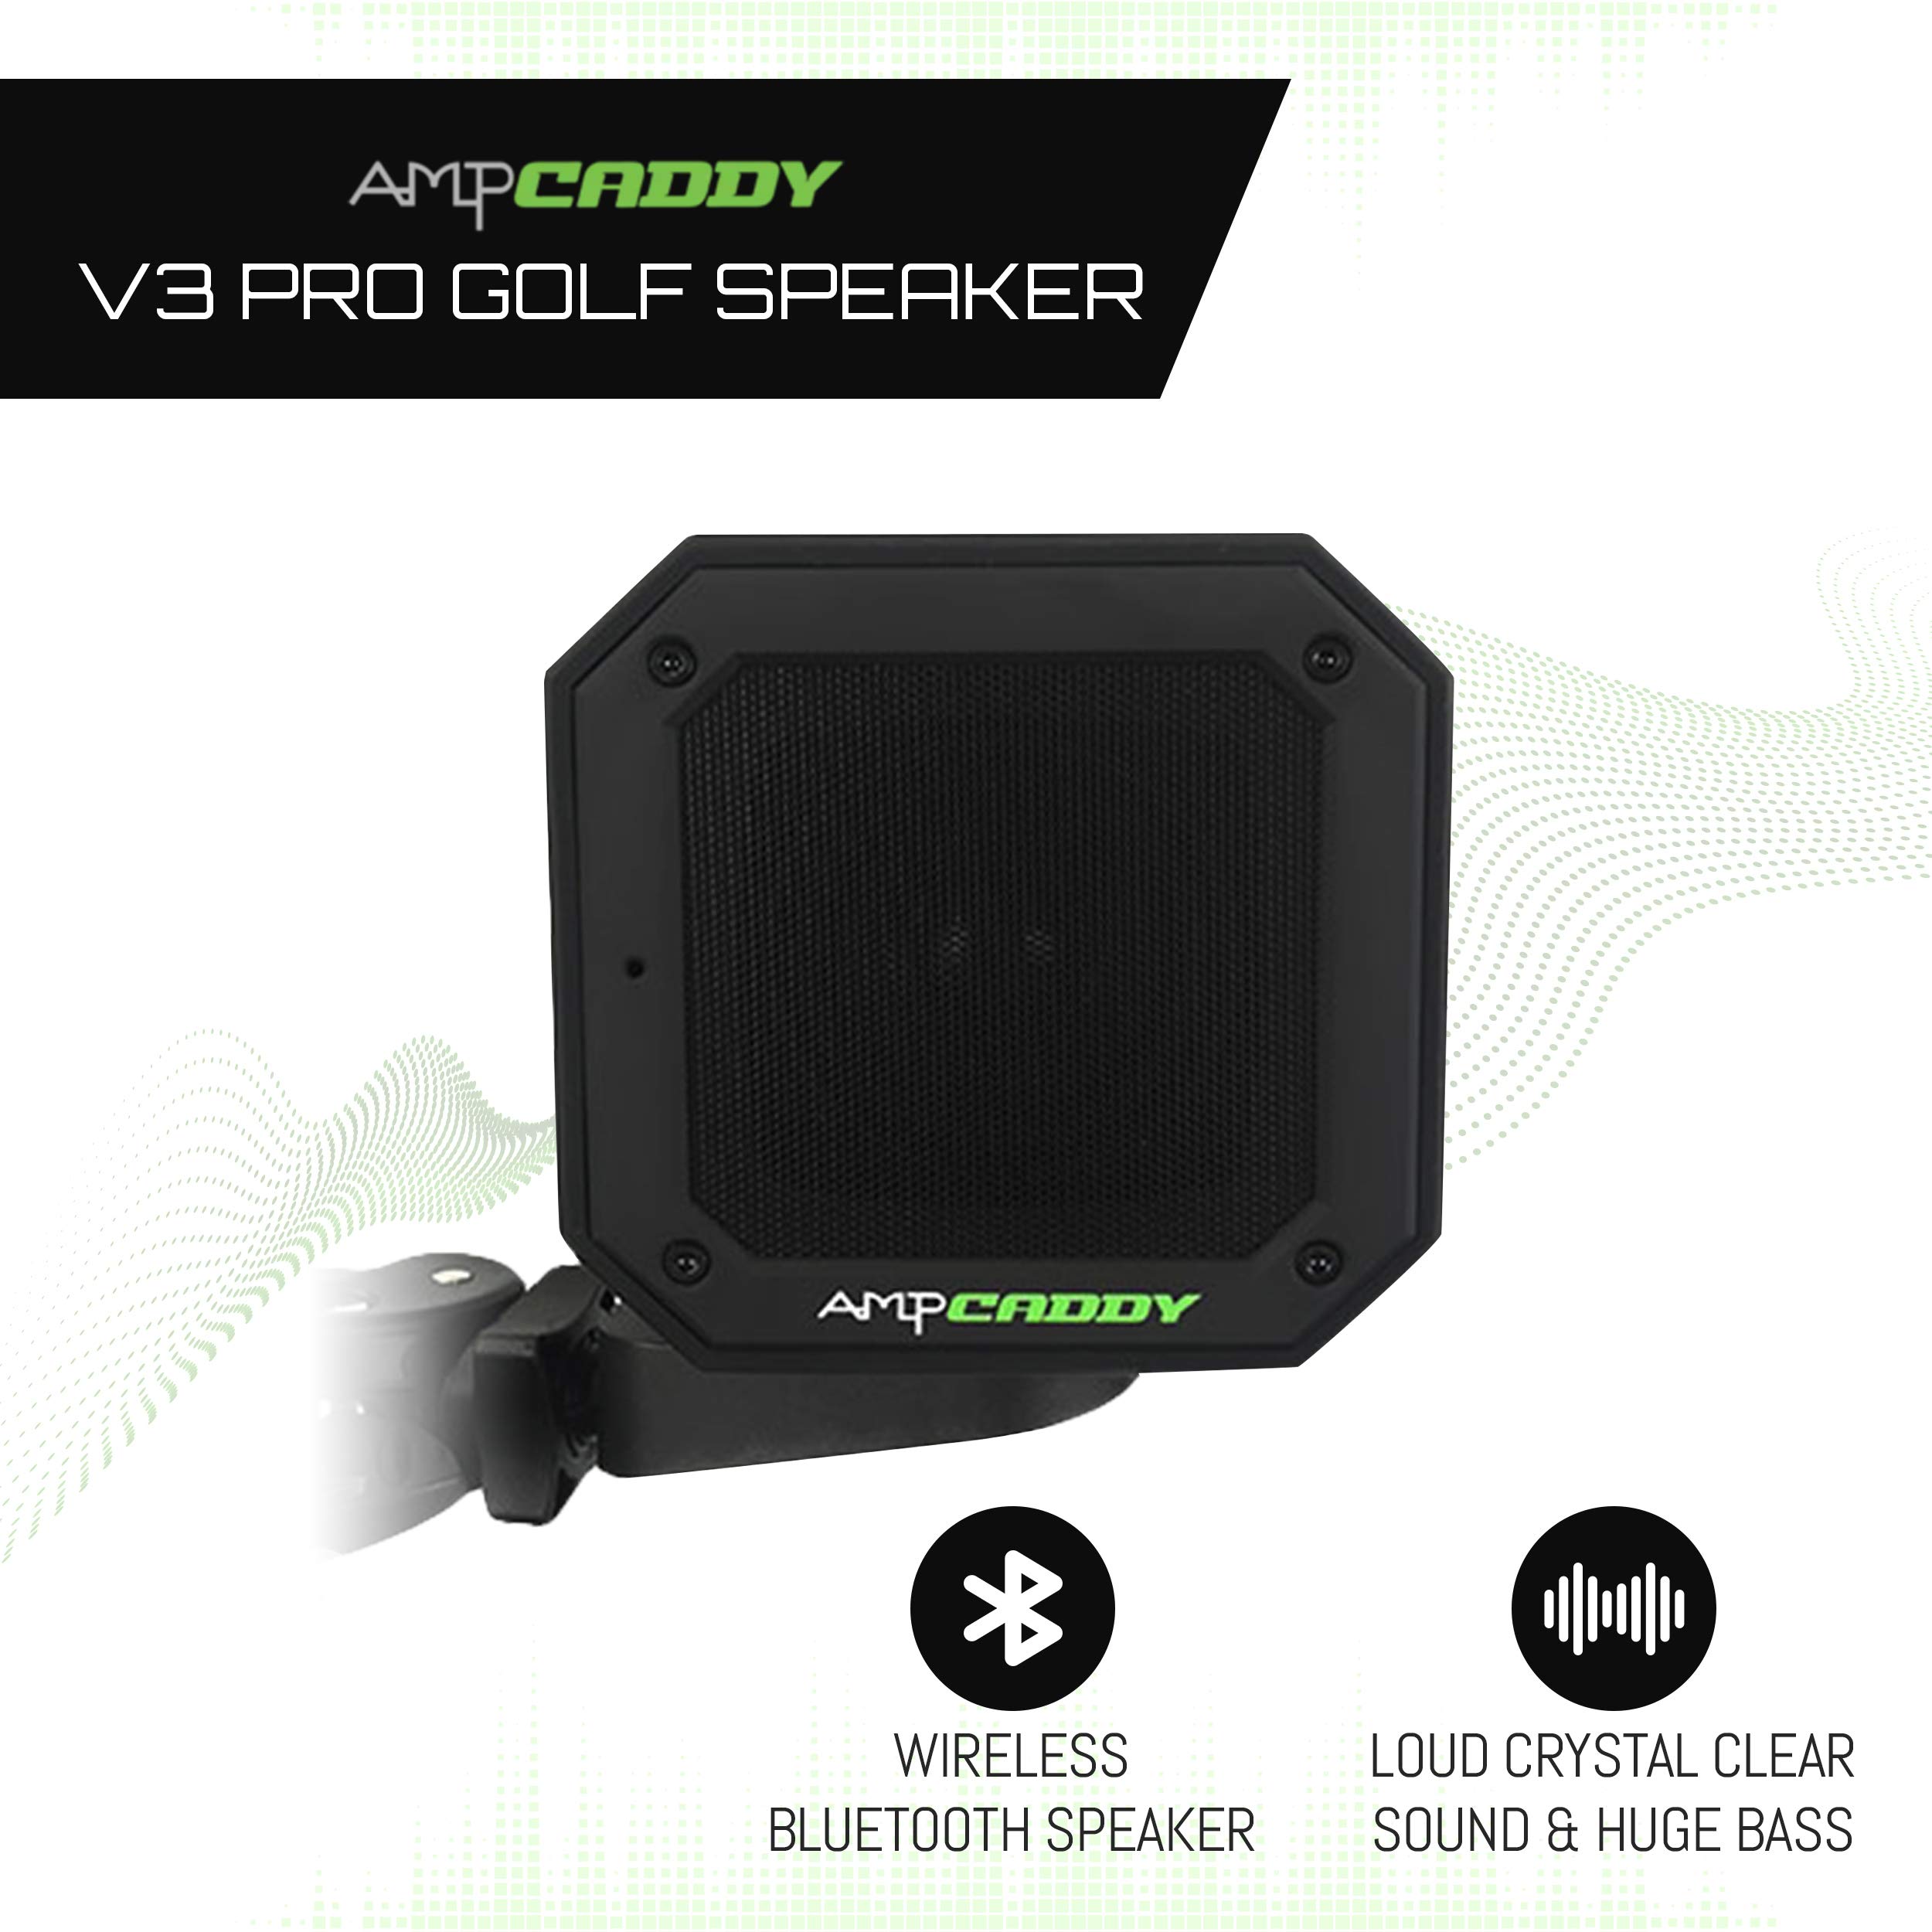 Ampcaddy Golf Bluetooth Speaker with Mount, Version 3 Pro Bluetooth Speaker and Mount with Loud Stereo Sound and Bass Boost, 20-